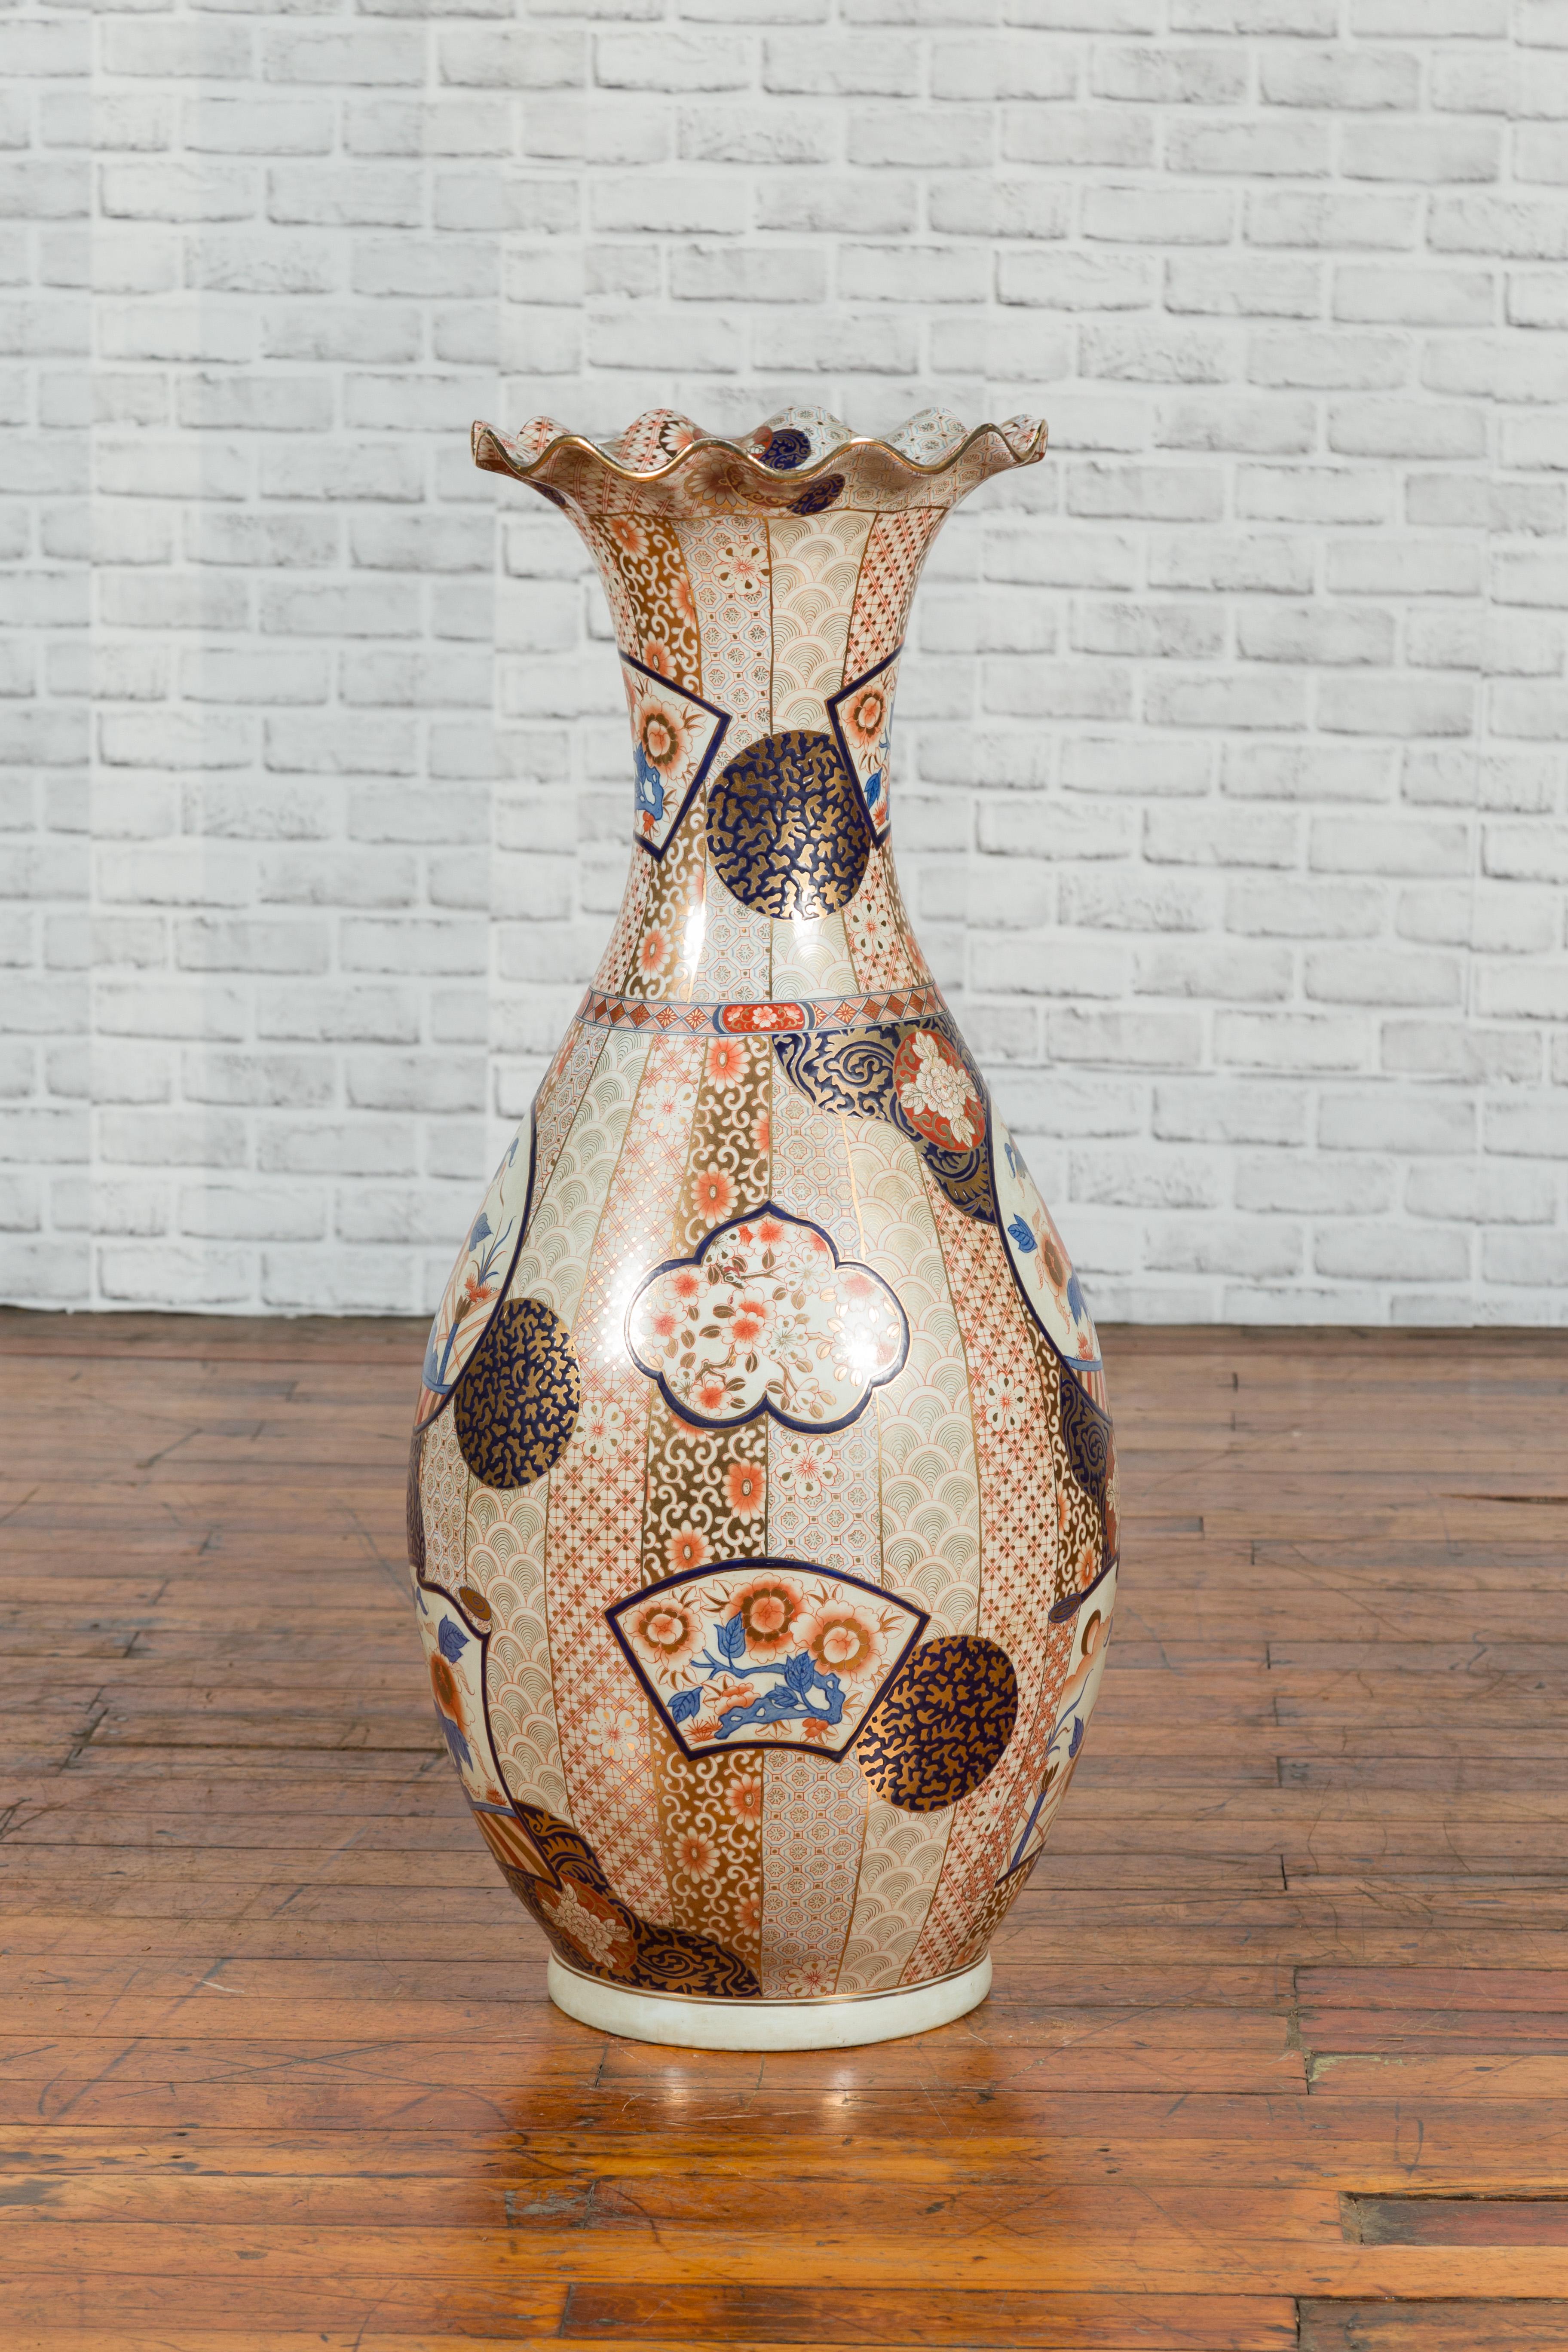 Ceramic Tall Vintage Chinese Vase with Hand Painted Blue, Orange and Gold Floral Decor For Sale